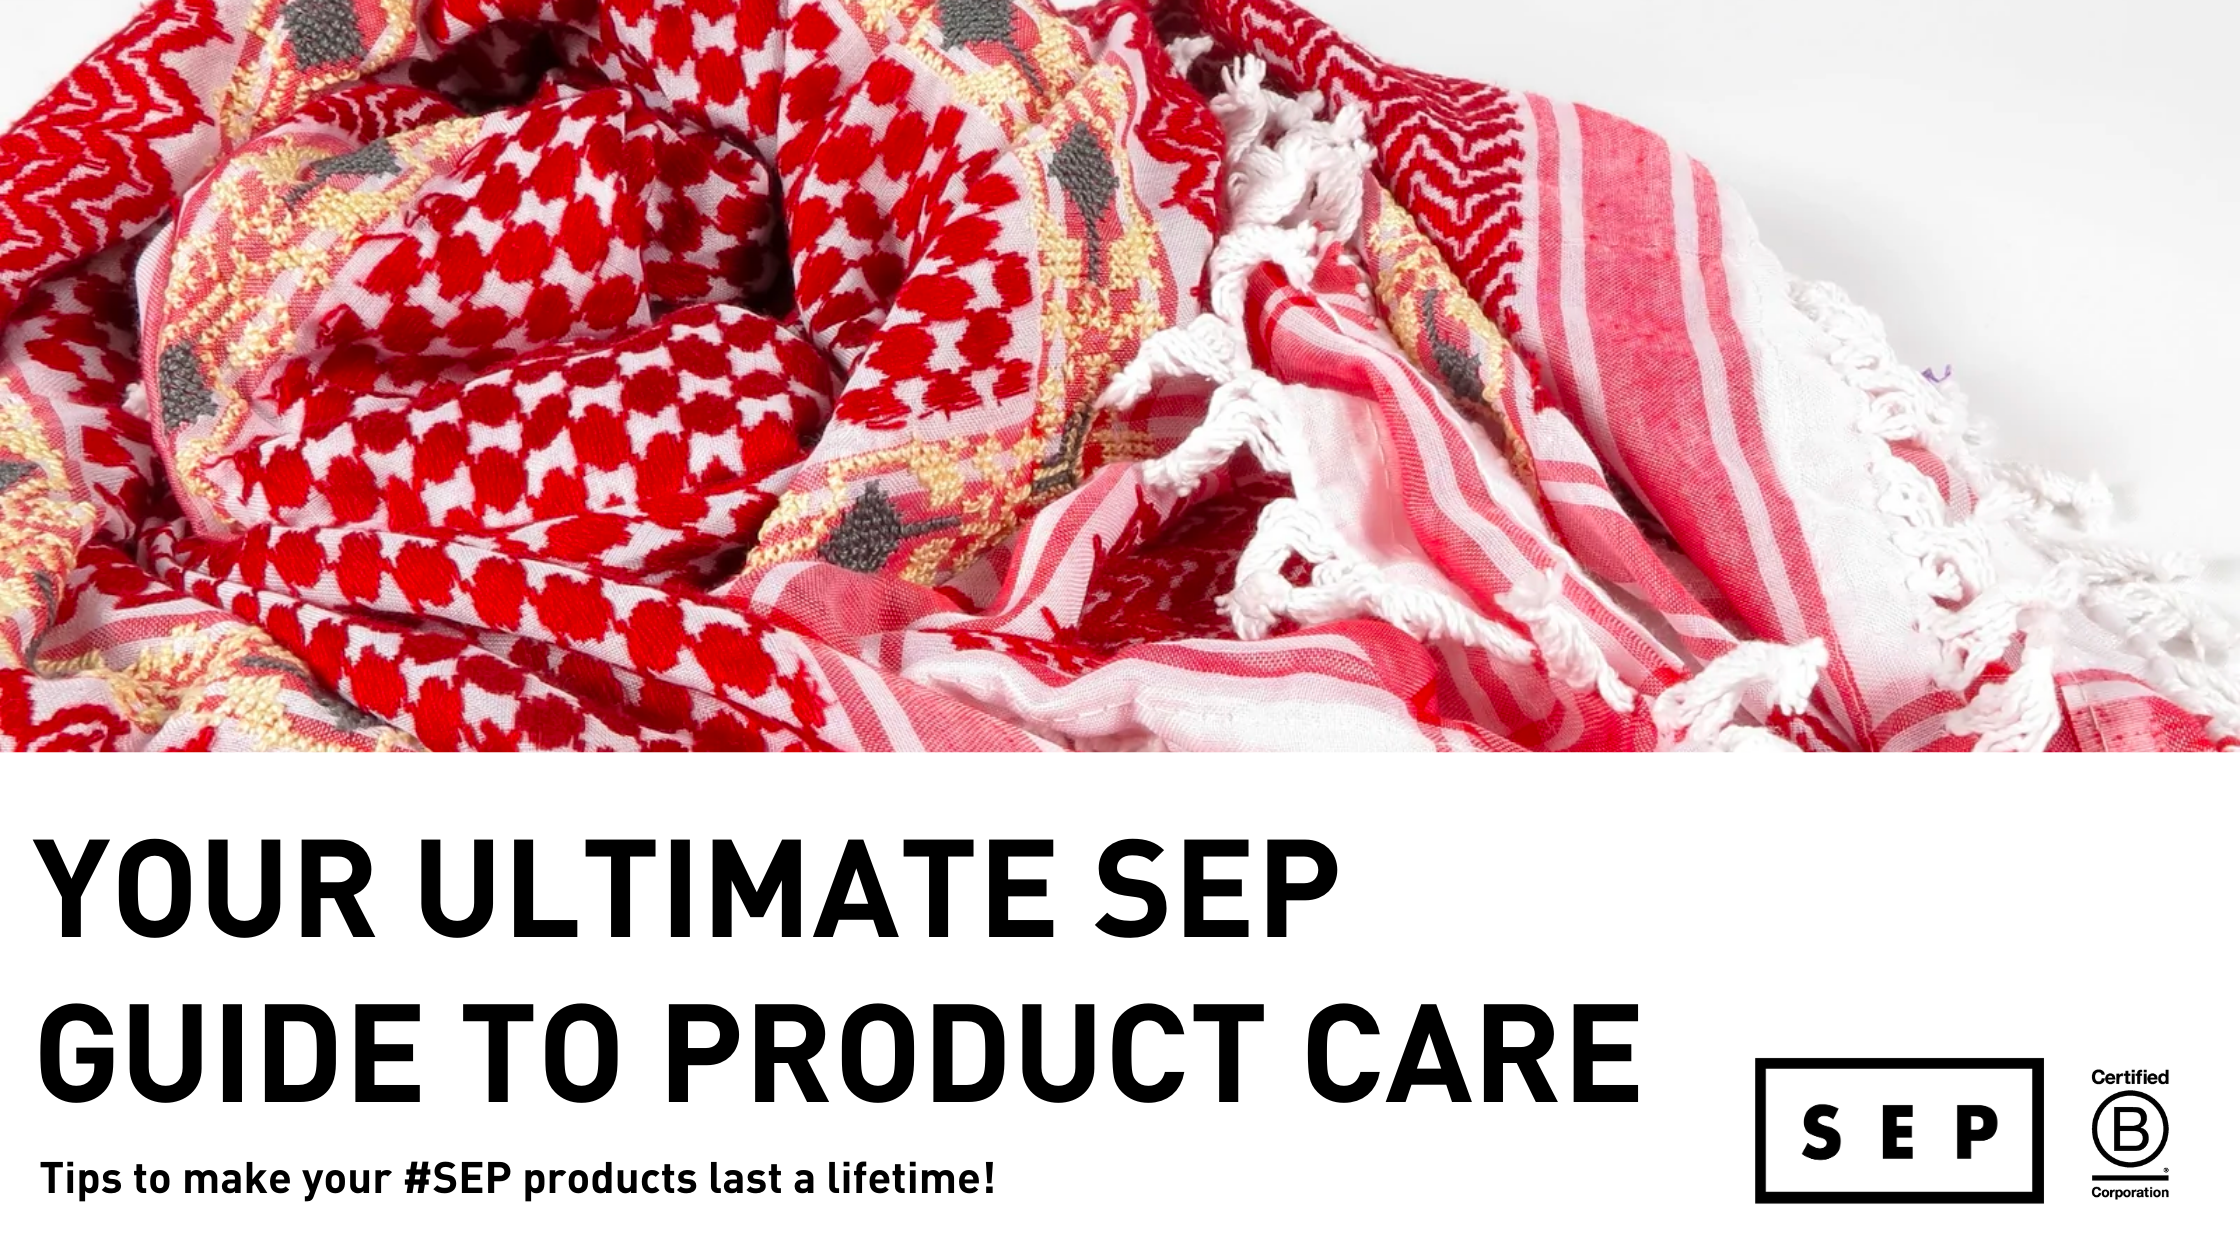 YOUR ULTIMATE SEP GUIDE TO PRODUCT CARE